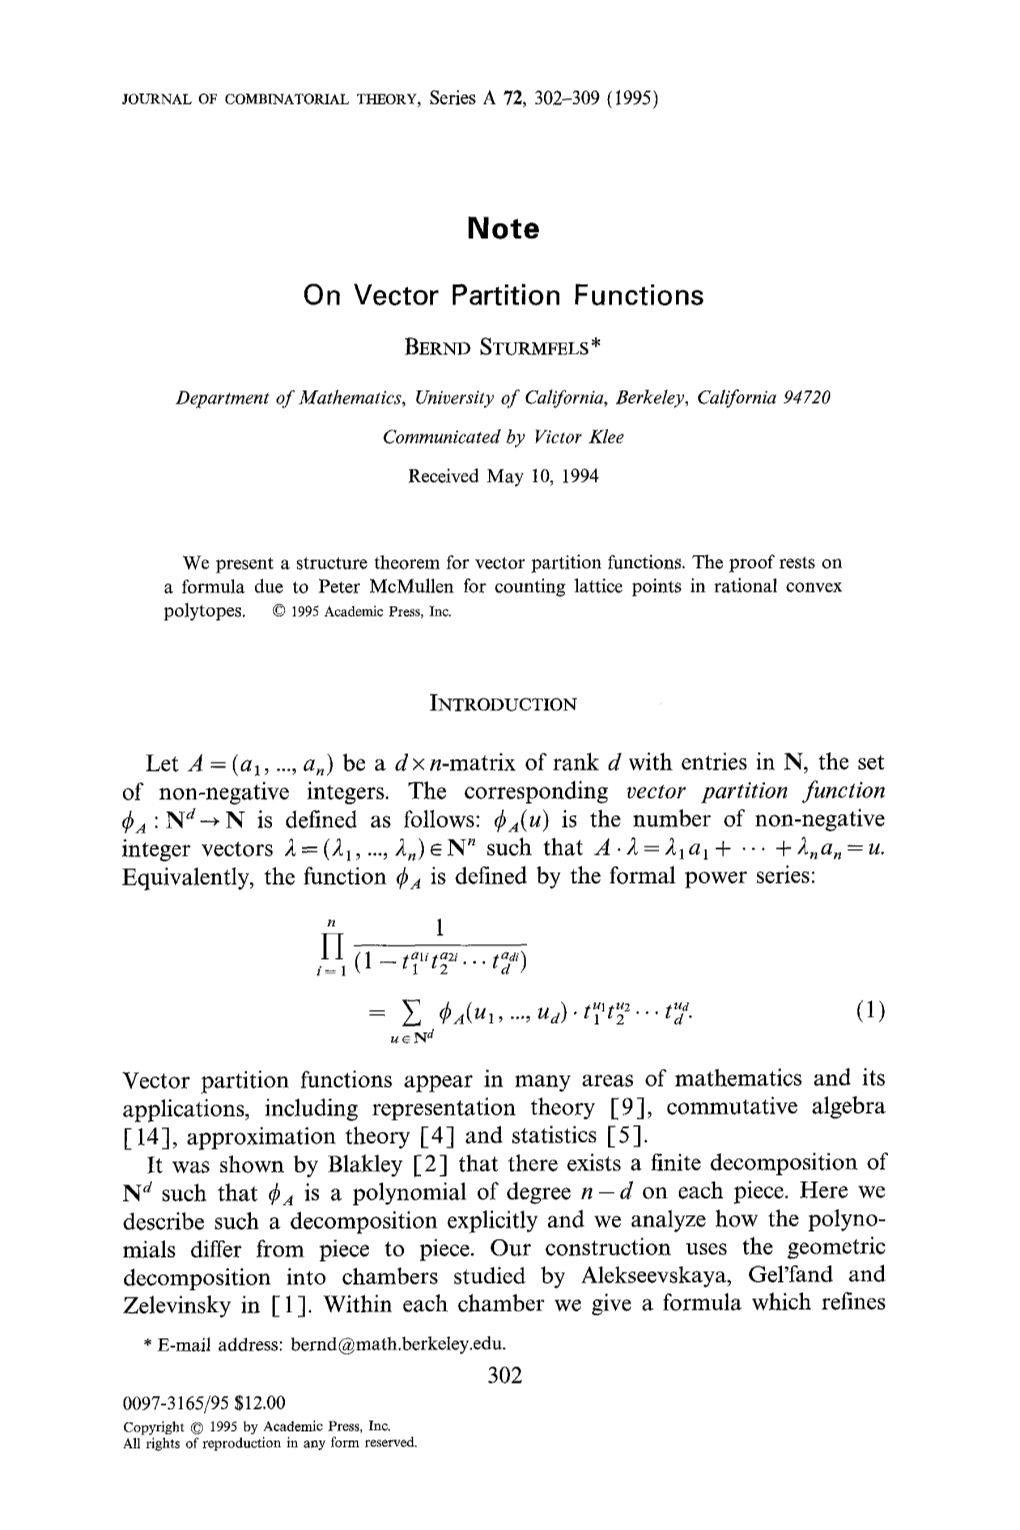 Note on Vector Partition Functions